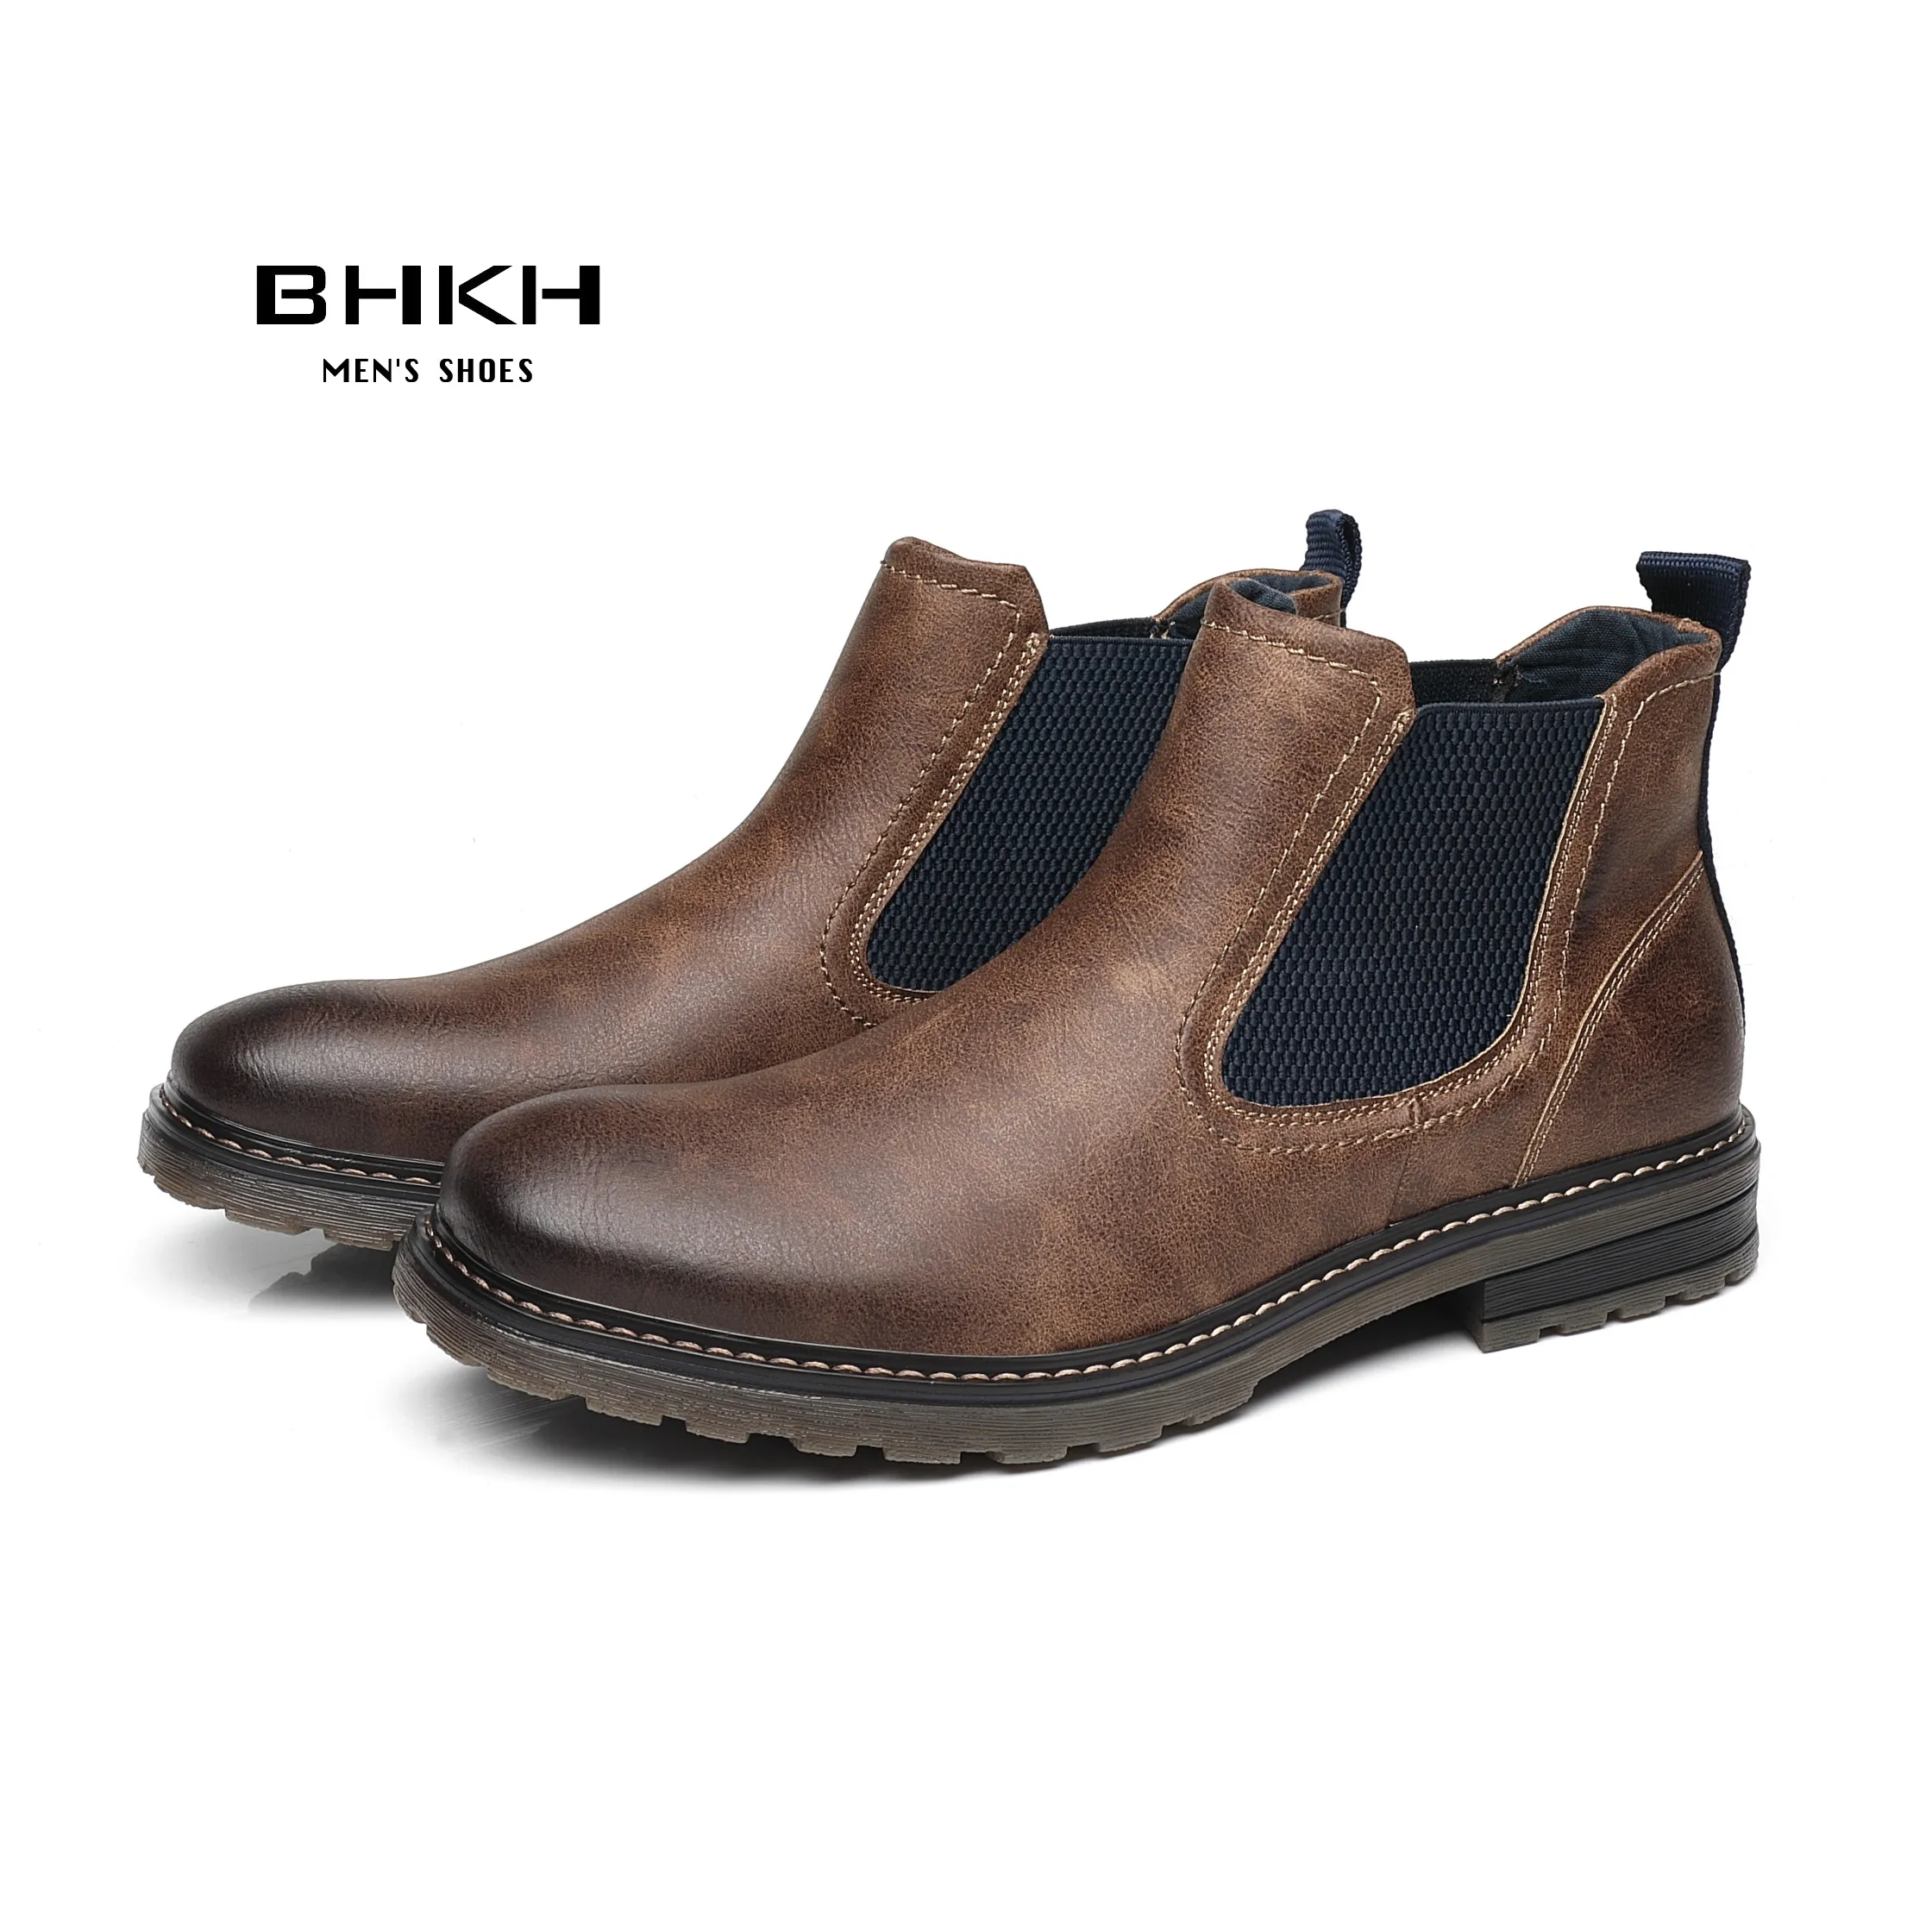 

BHKH 2021 Men Chelsea Boots New Winter Men Boots Soft Leather Elastic Strap Ankle Boots Smart Formal Business Casual Man Shoes